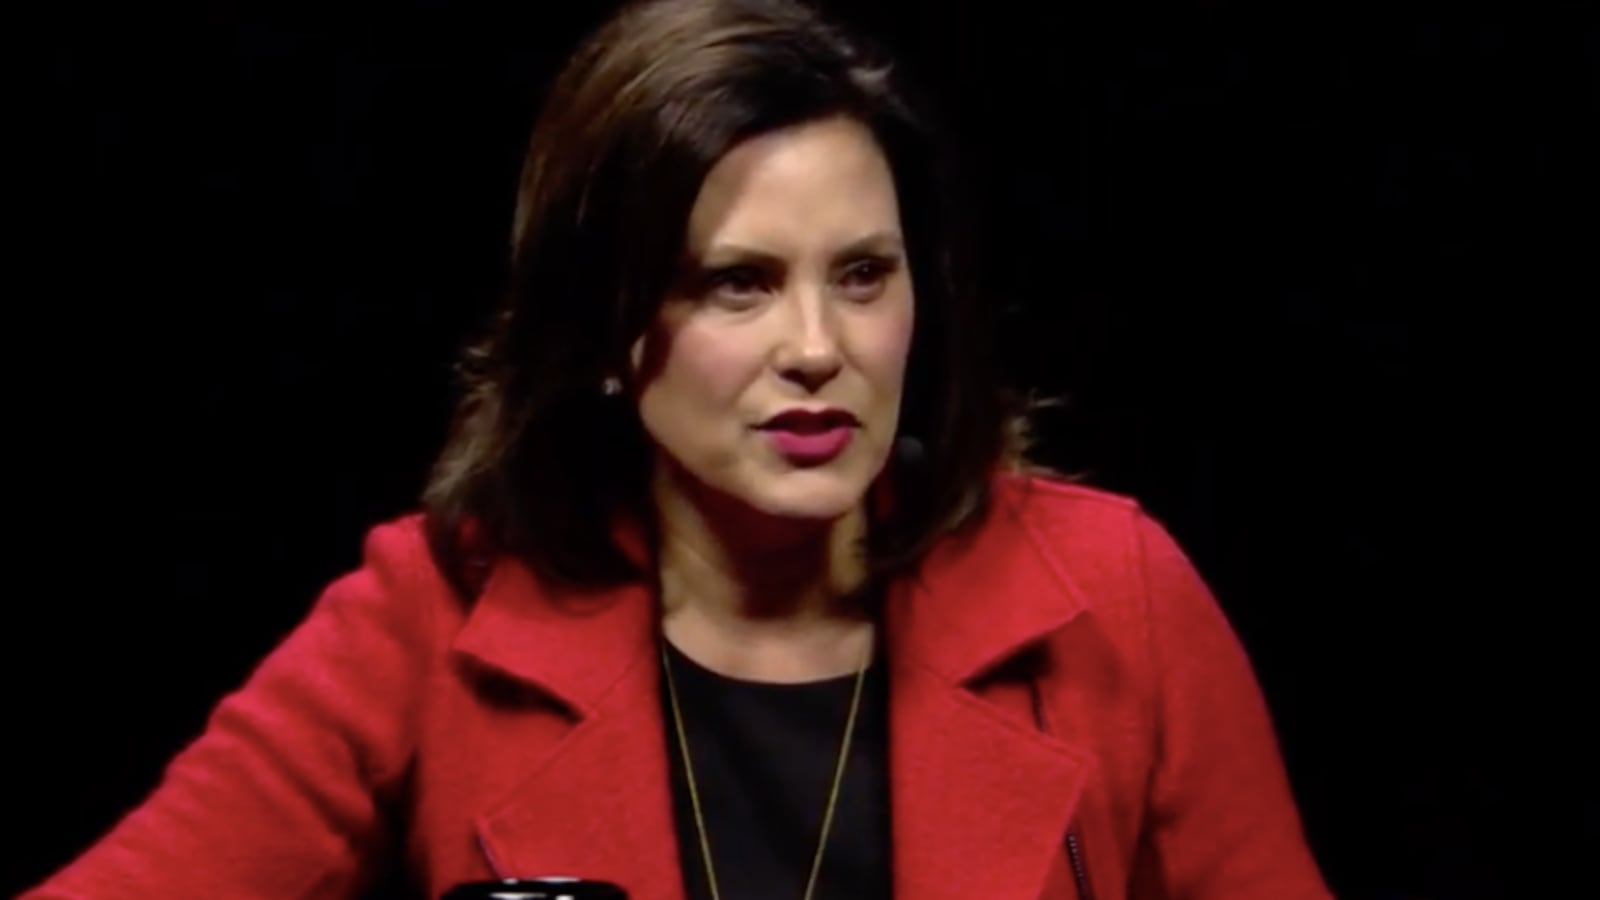 Gretchen Whitmer promised to boost school funding if she is elected governor.